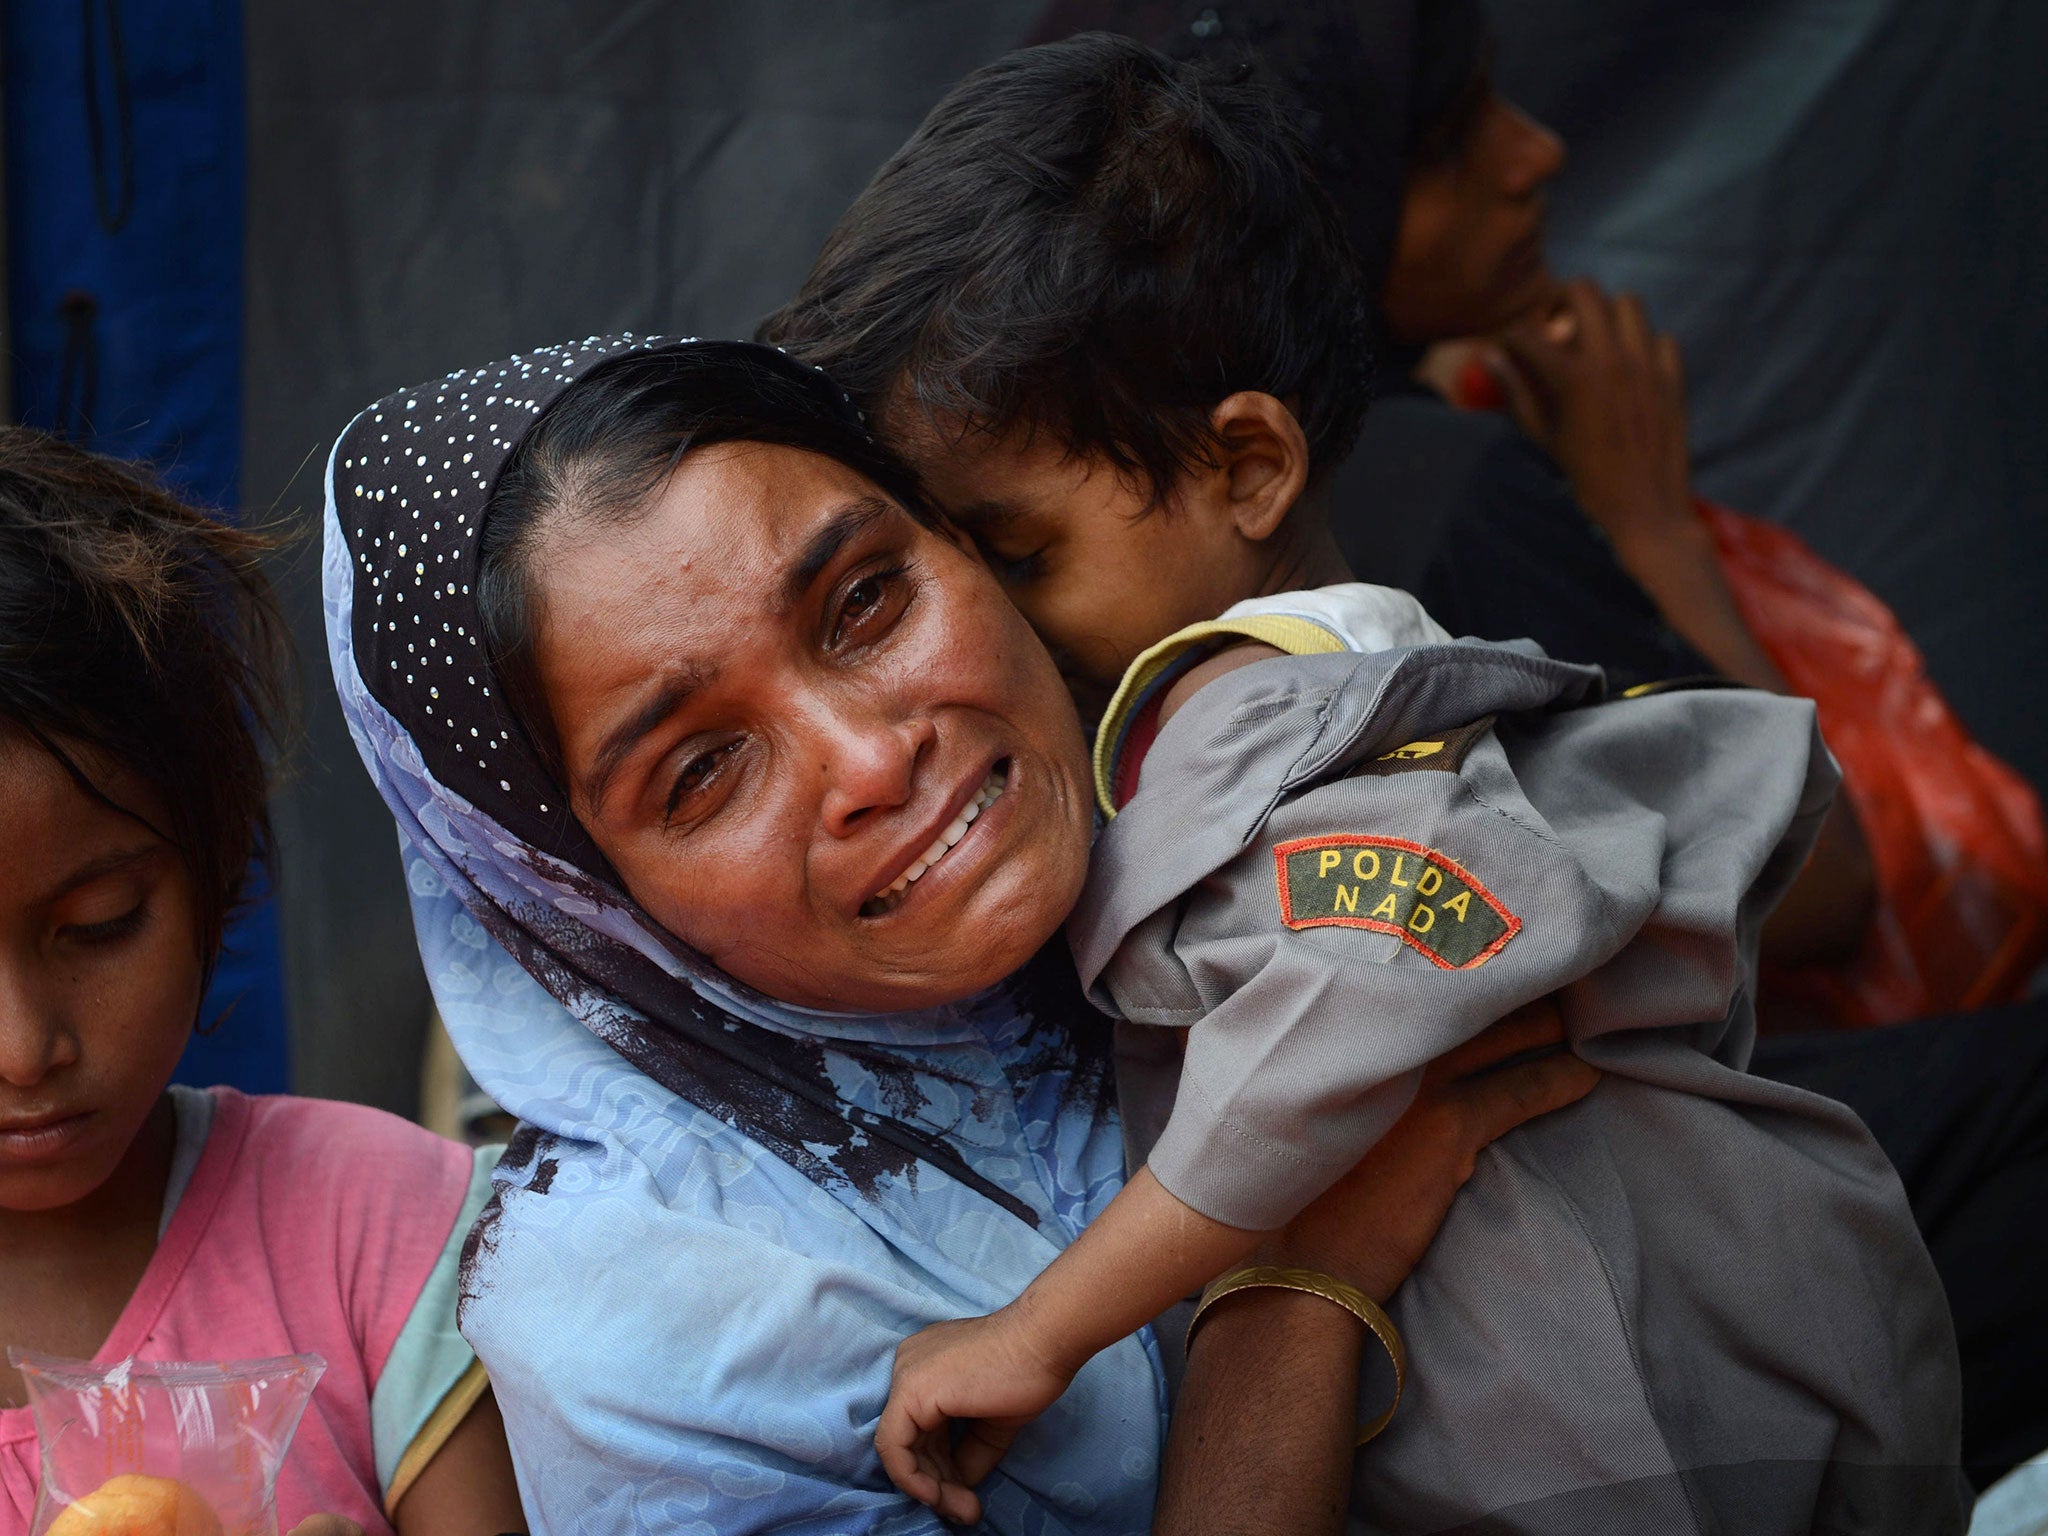 A migrant Rohingya woman from Myanmar breaks down while holding her son at the new confinement area in the fishing town of Kuala Langsa in Aceh province